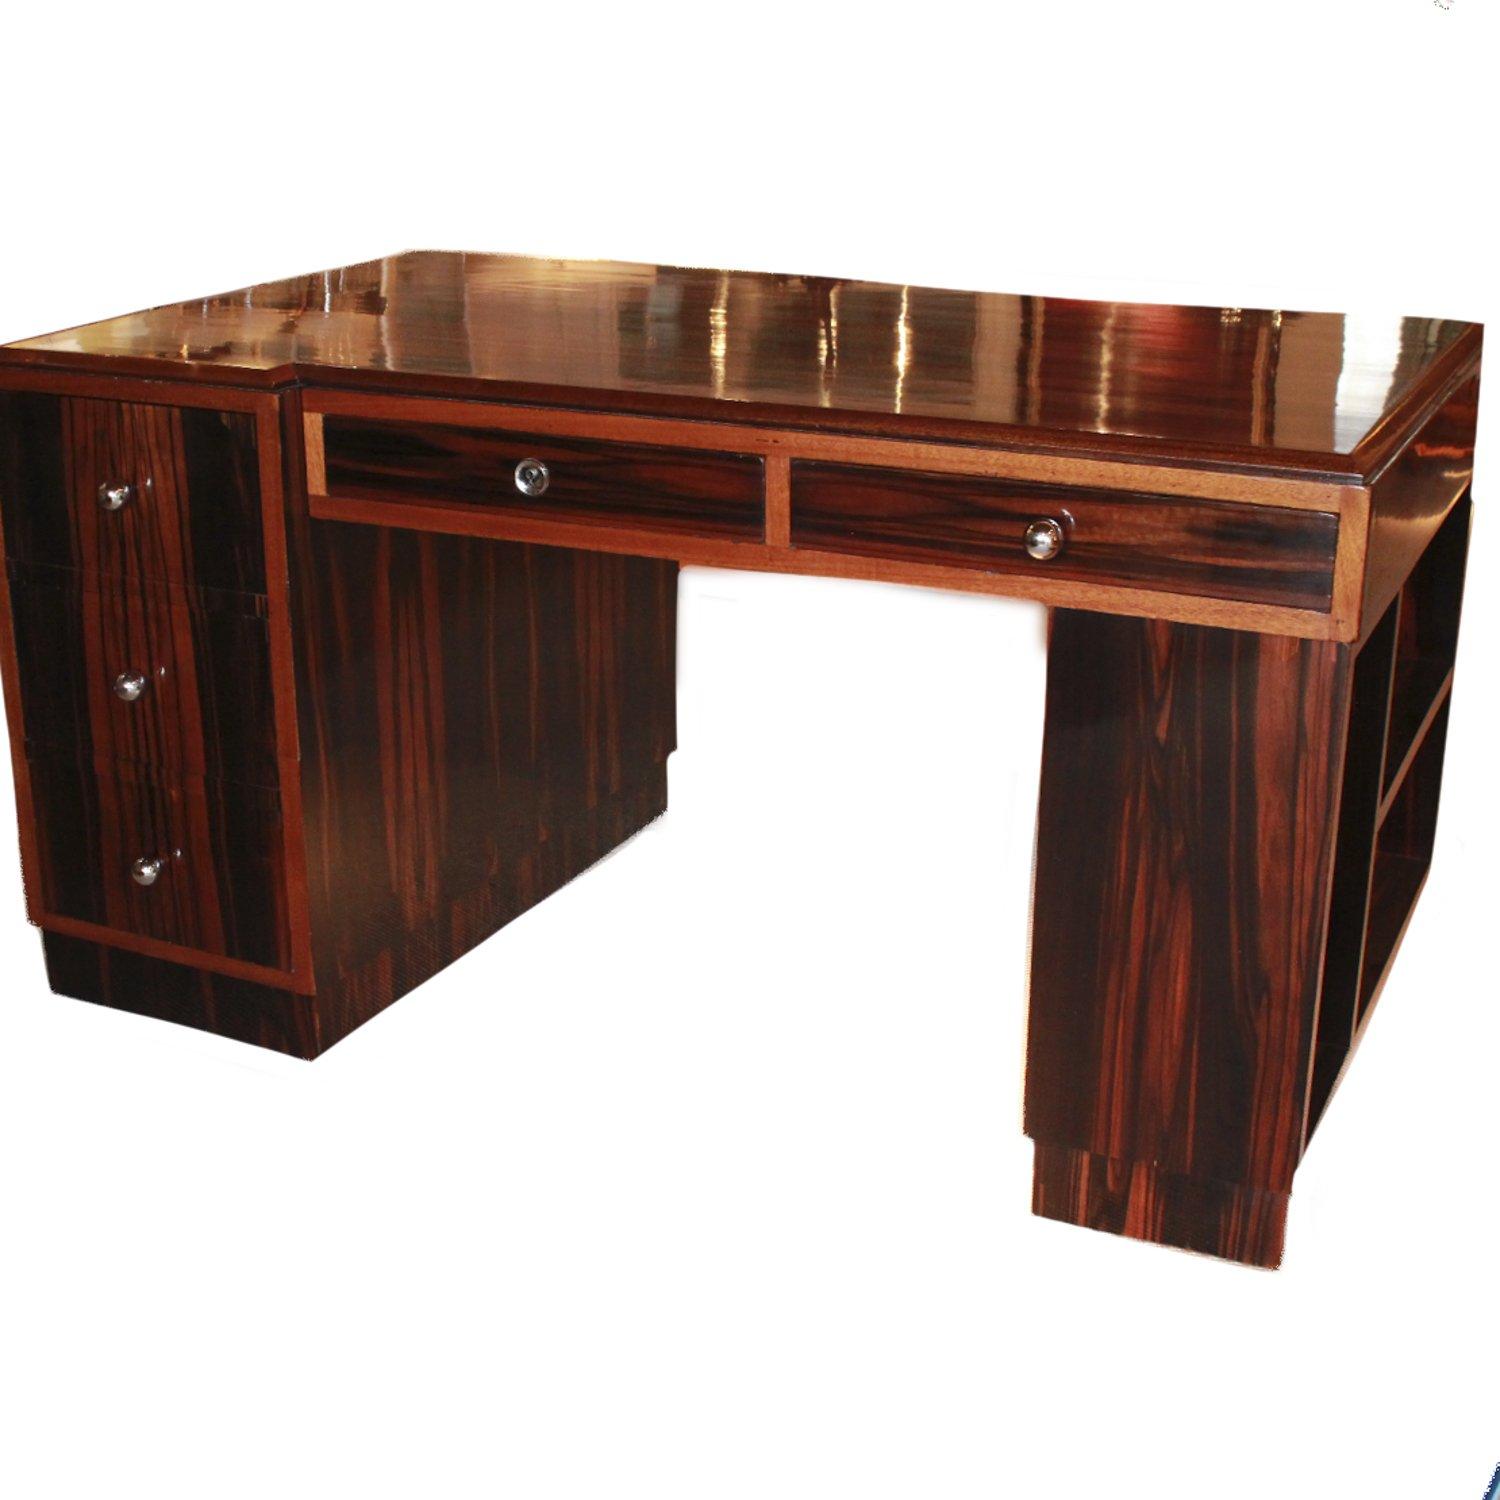 An Art Deco Macassar ebony desk with original chromed, brass handles. Three short drawers to left side pedestal with two drawers to top and library book shelves to outside pedestal. Veneered in Macassar throughout.

Dimensions: H 75cm, W 140cm, D